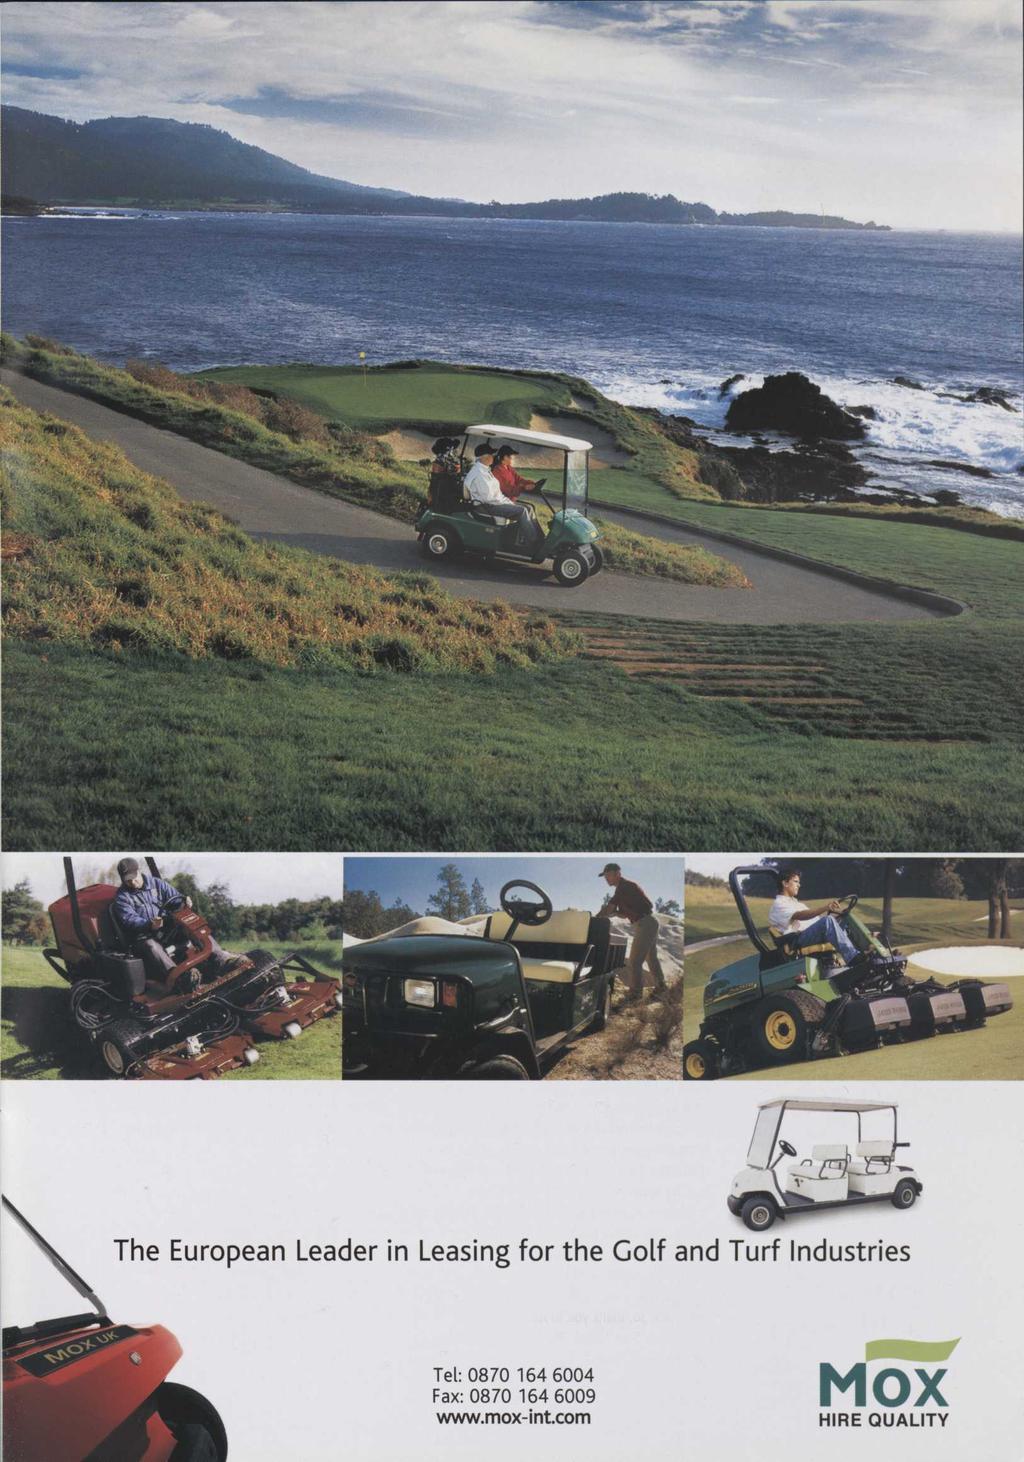 The European Leader in Leasing for the Golf and Turf Industries